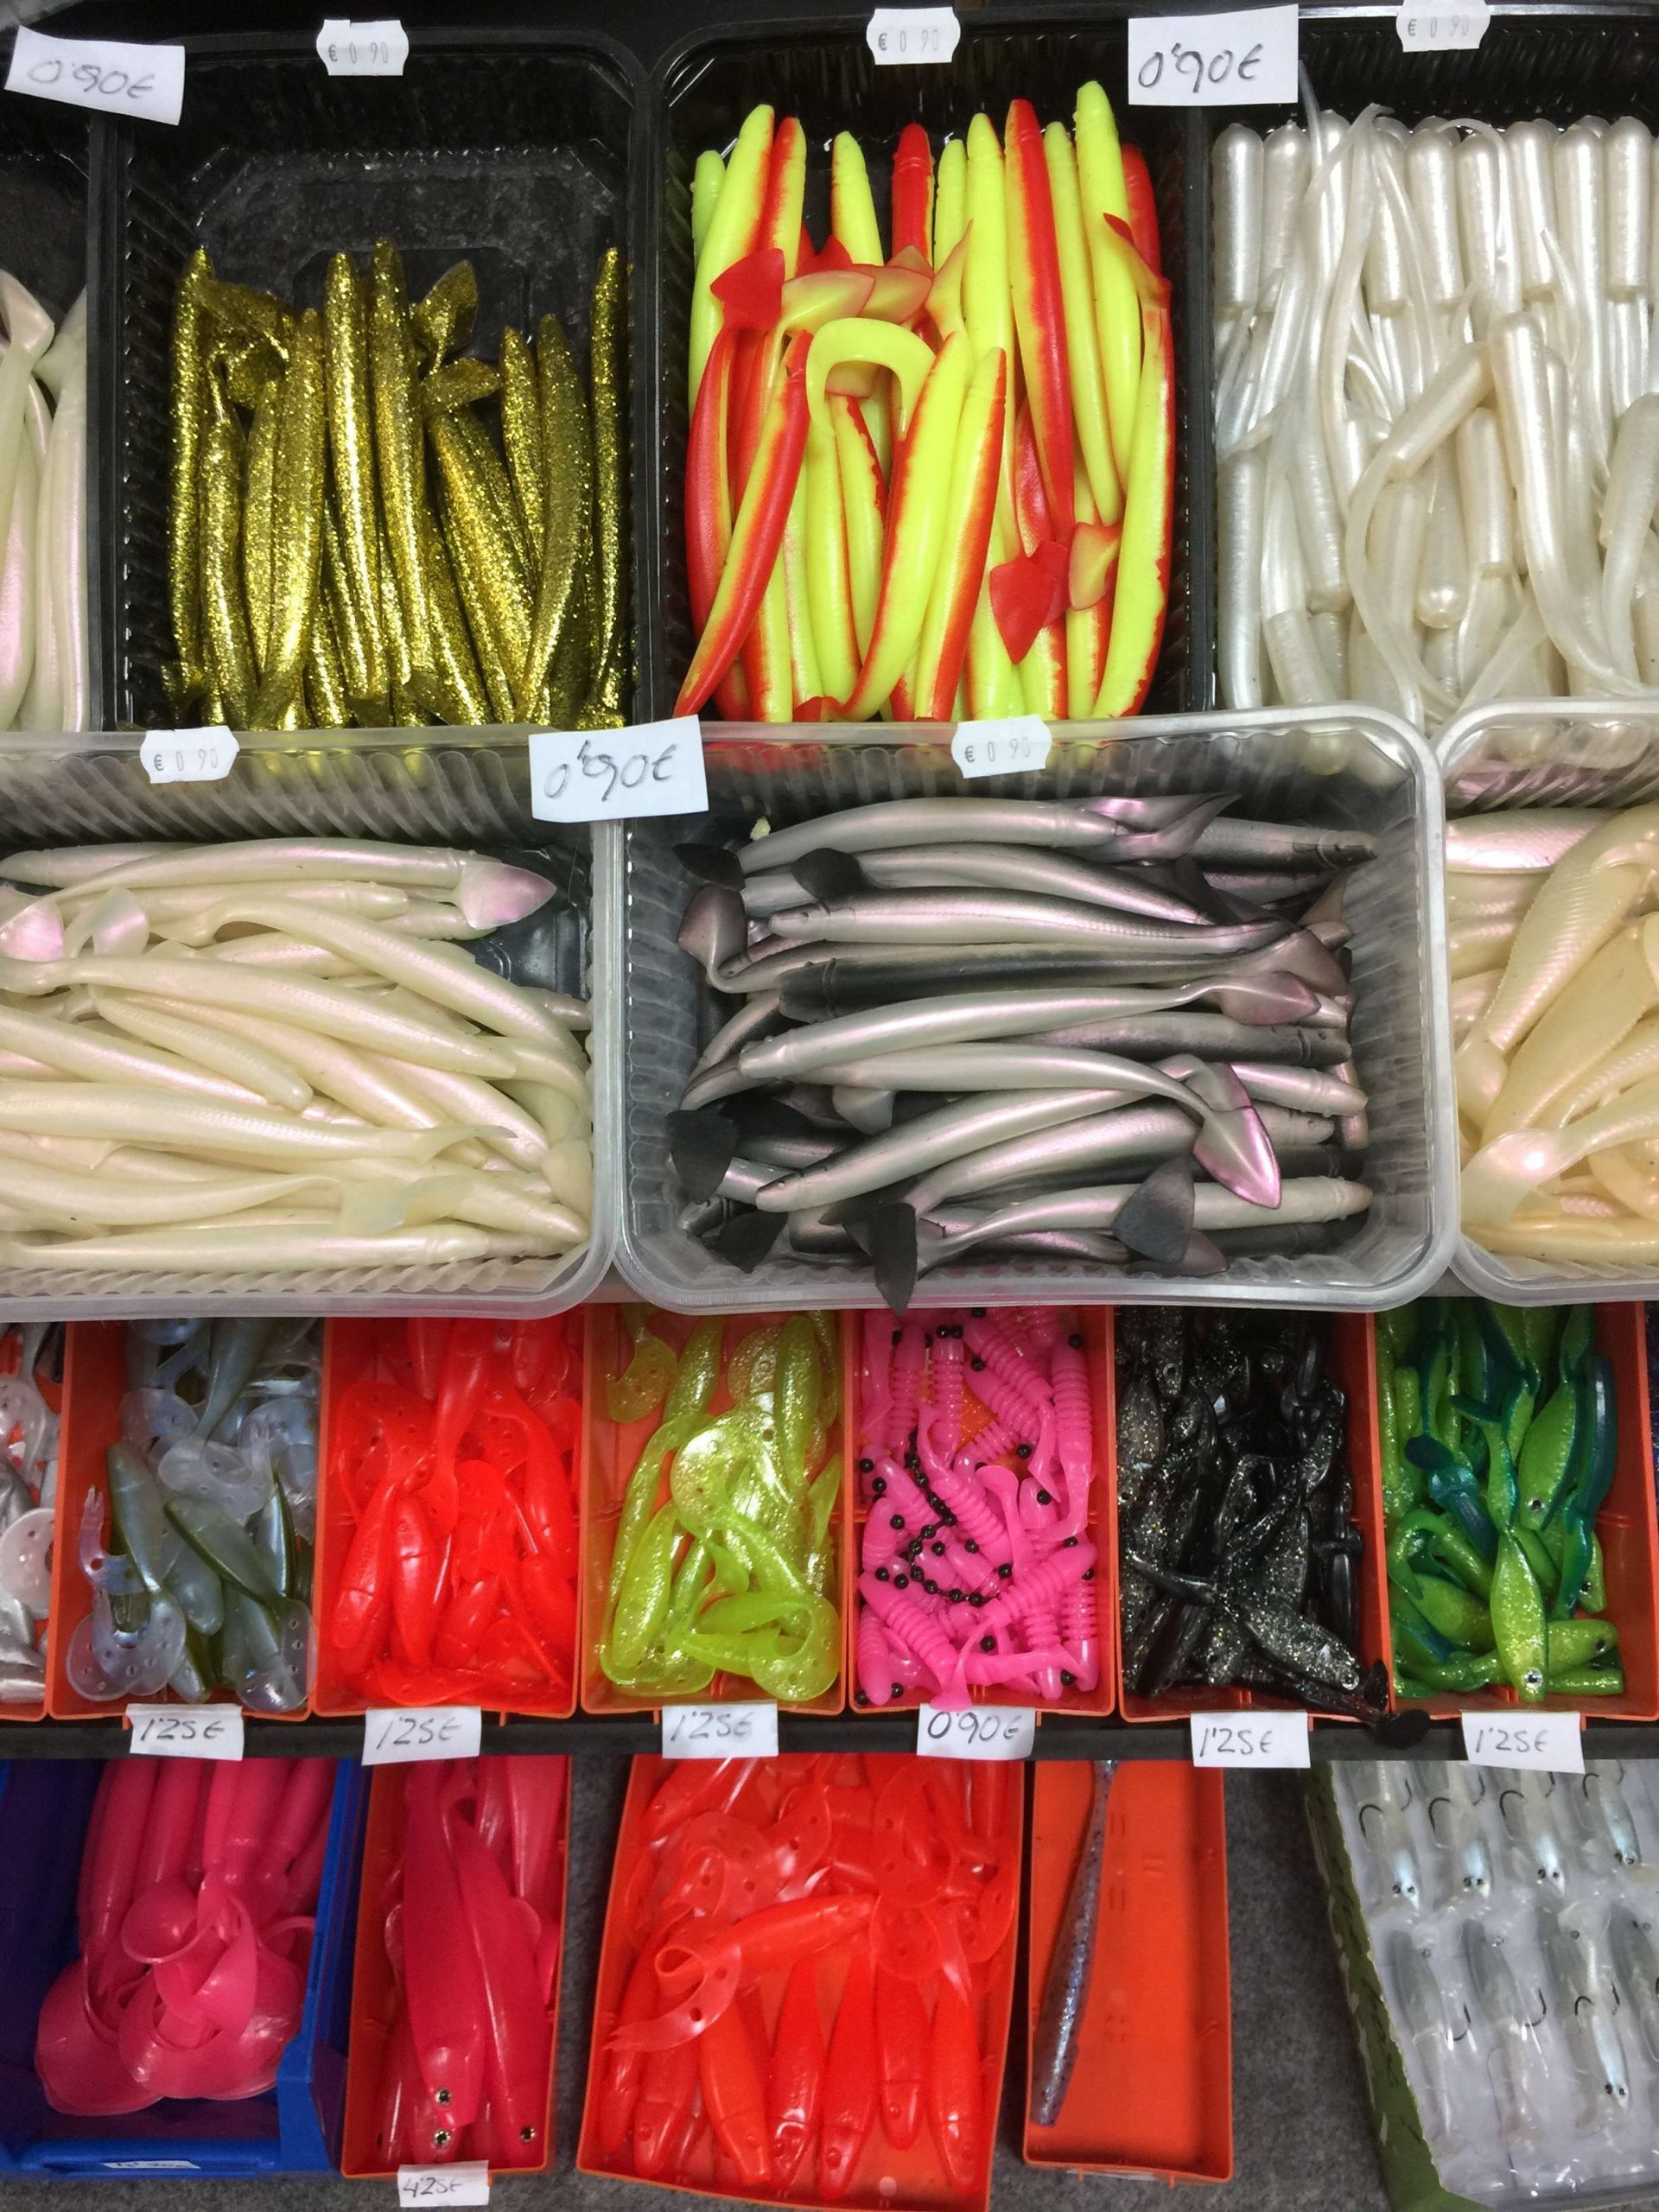 It was interesting to see soft plastics sold by the pound. Evidently, swimbaits are popular on Lake Caspe.